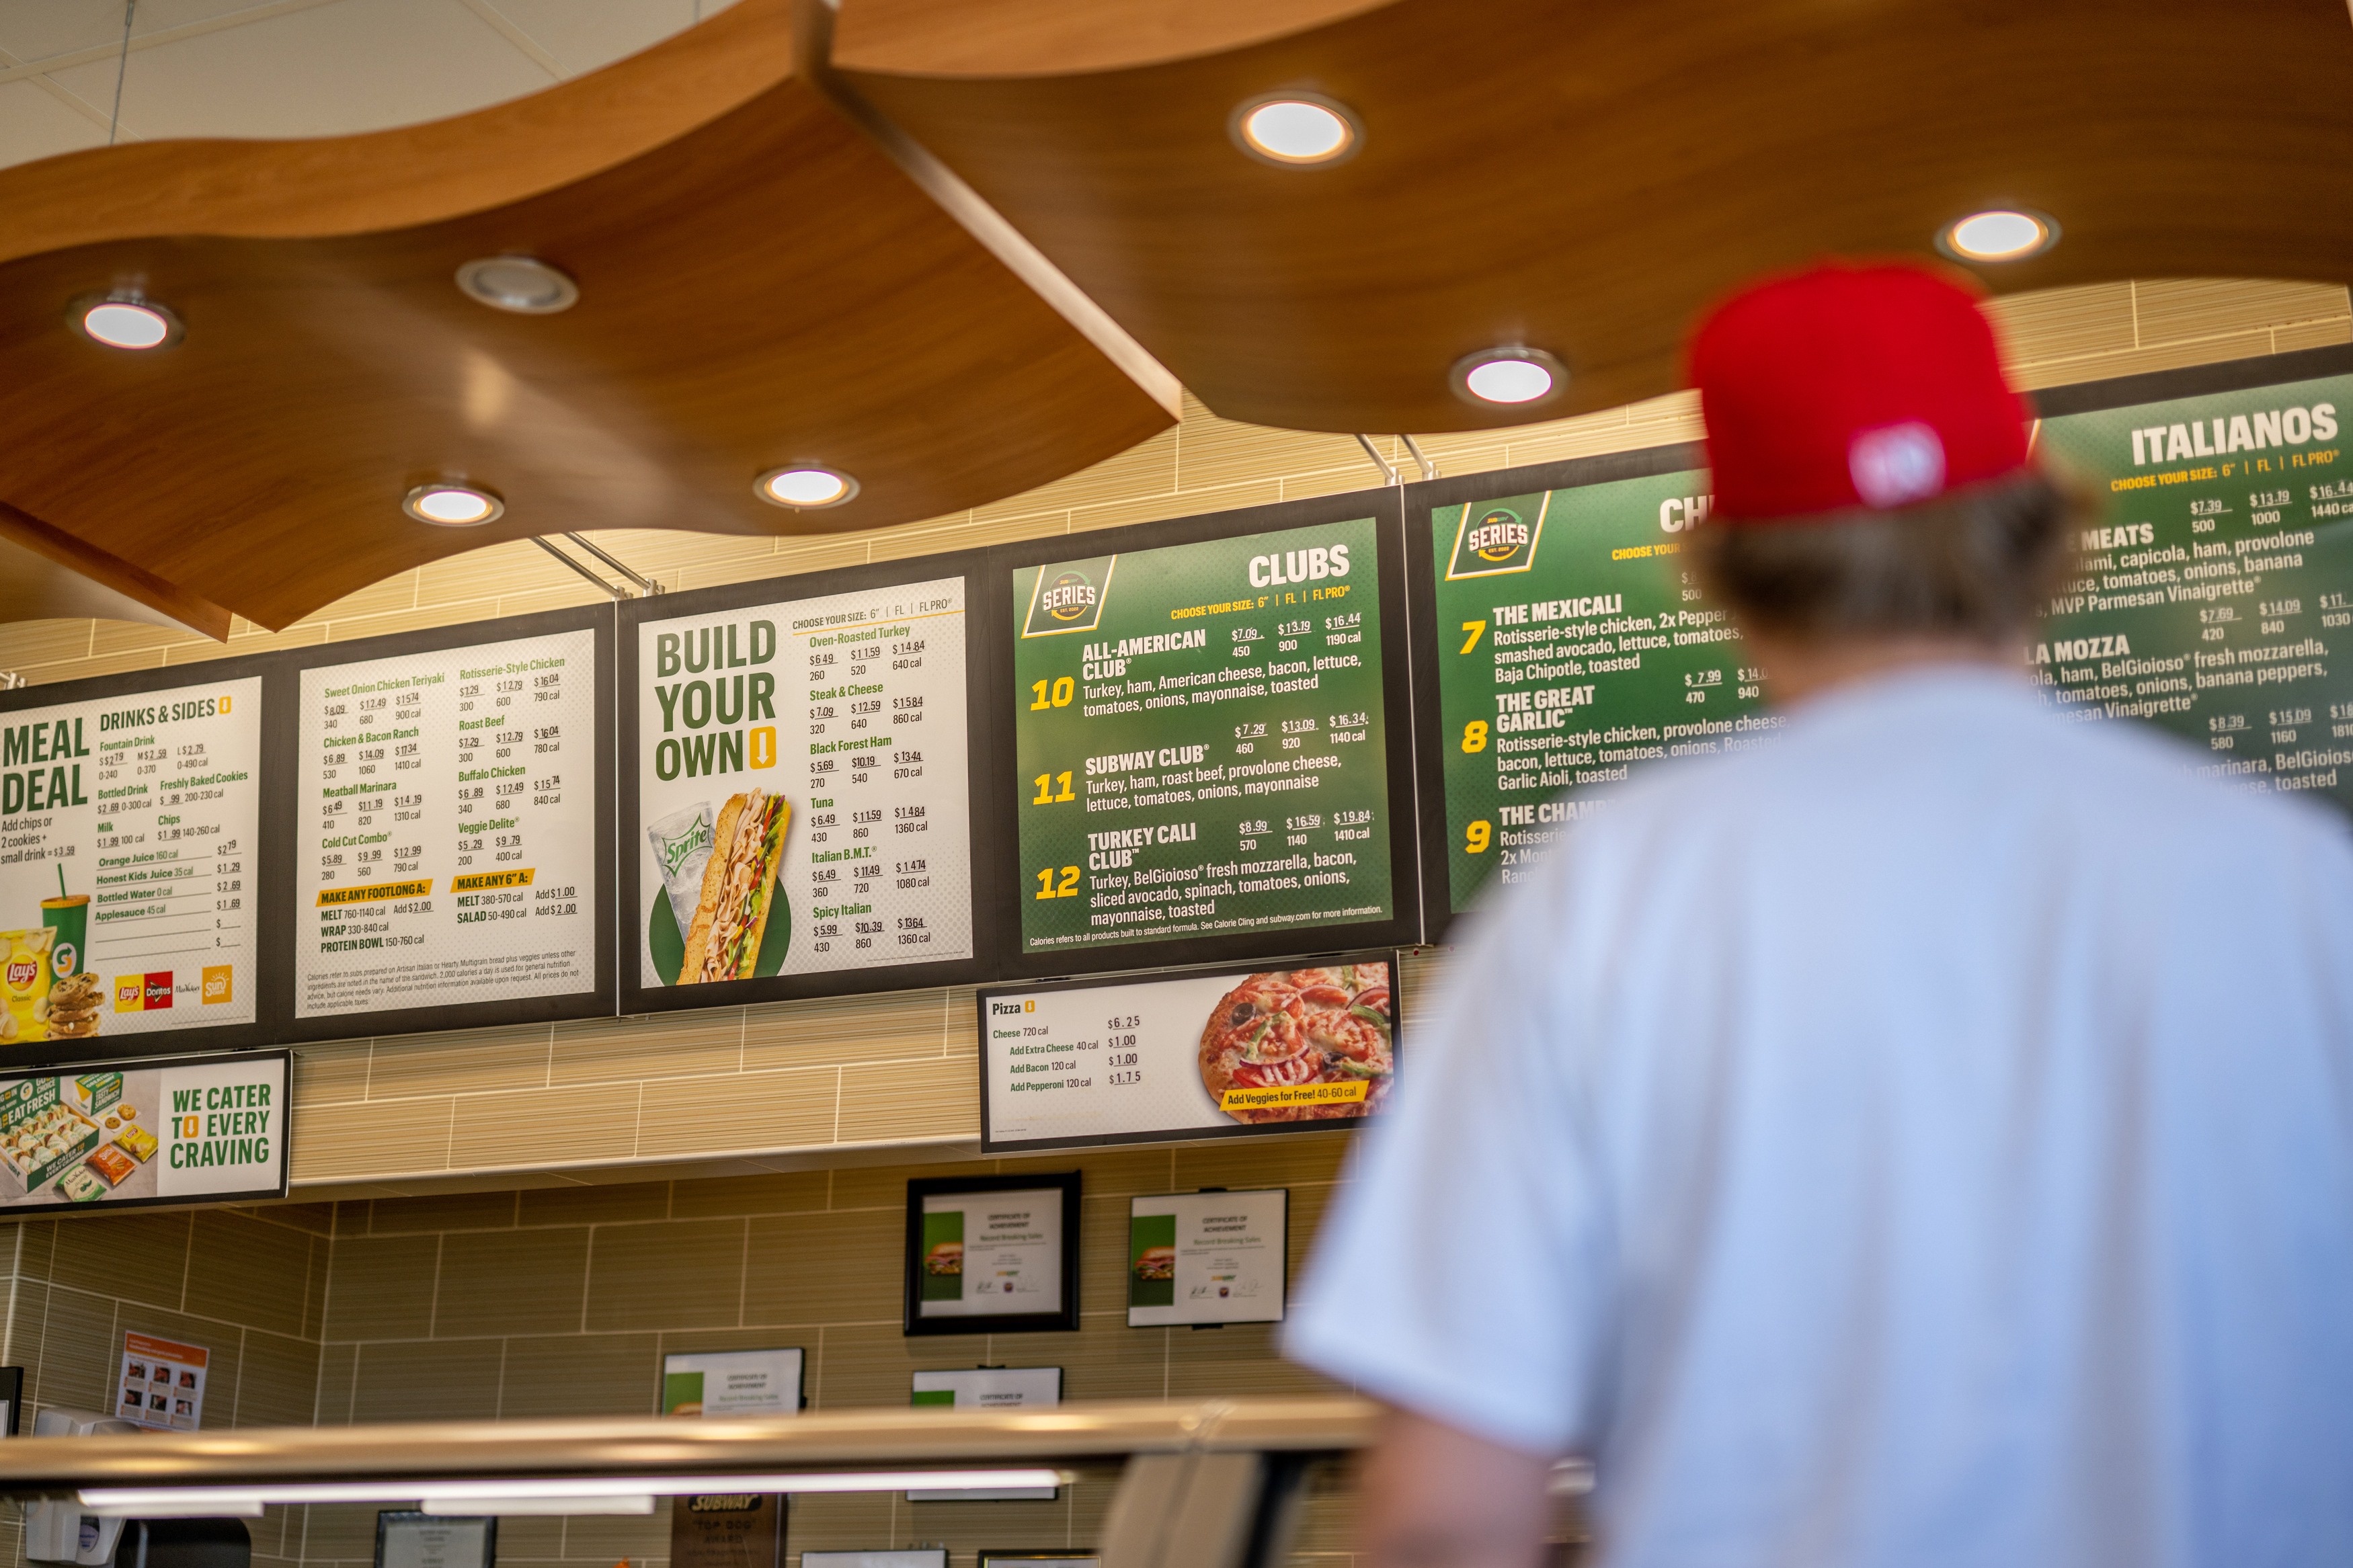 Free Subway sandwich giveaway: How to get a 6-inch sub on 7/11